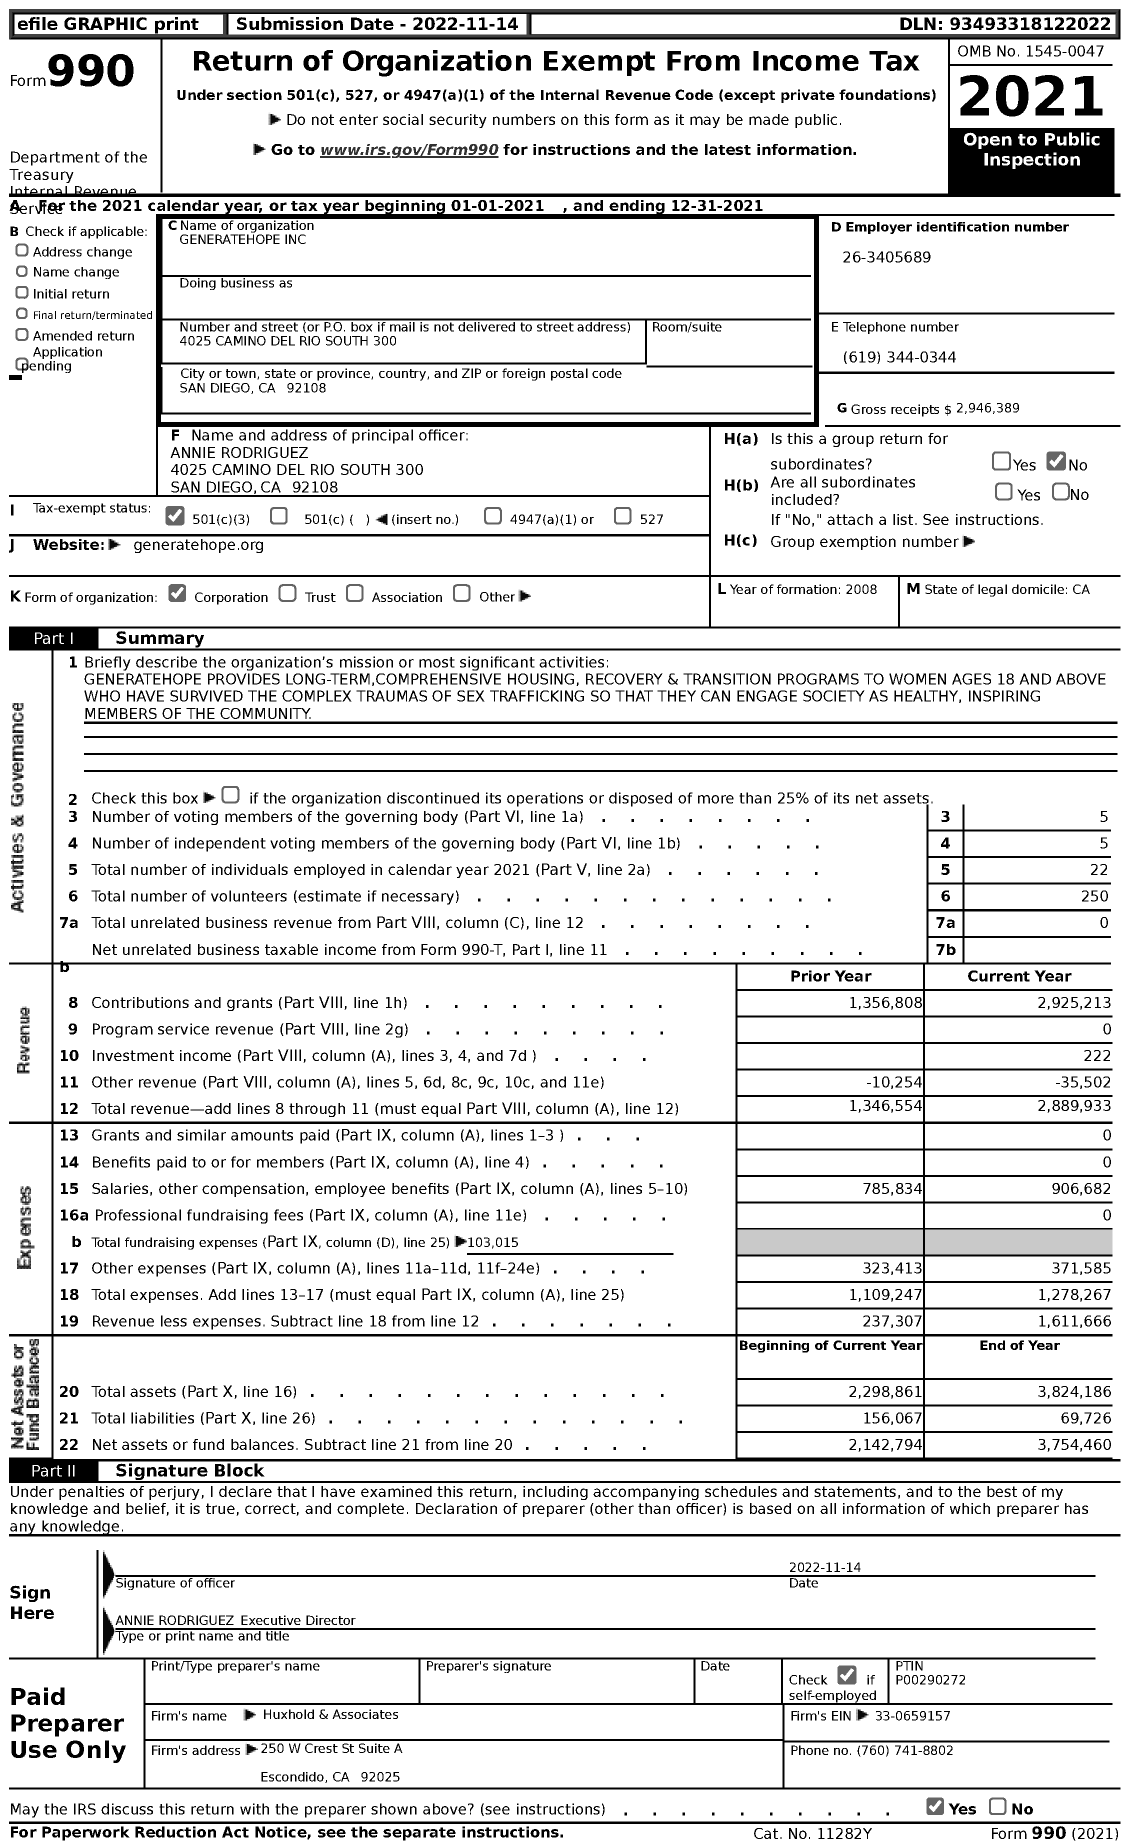 Image of first page of 2021 Form 990 for Generatehope